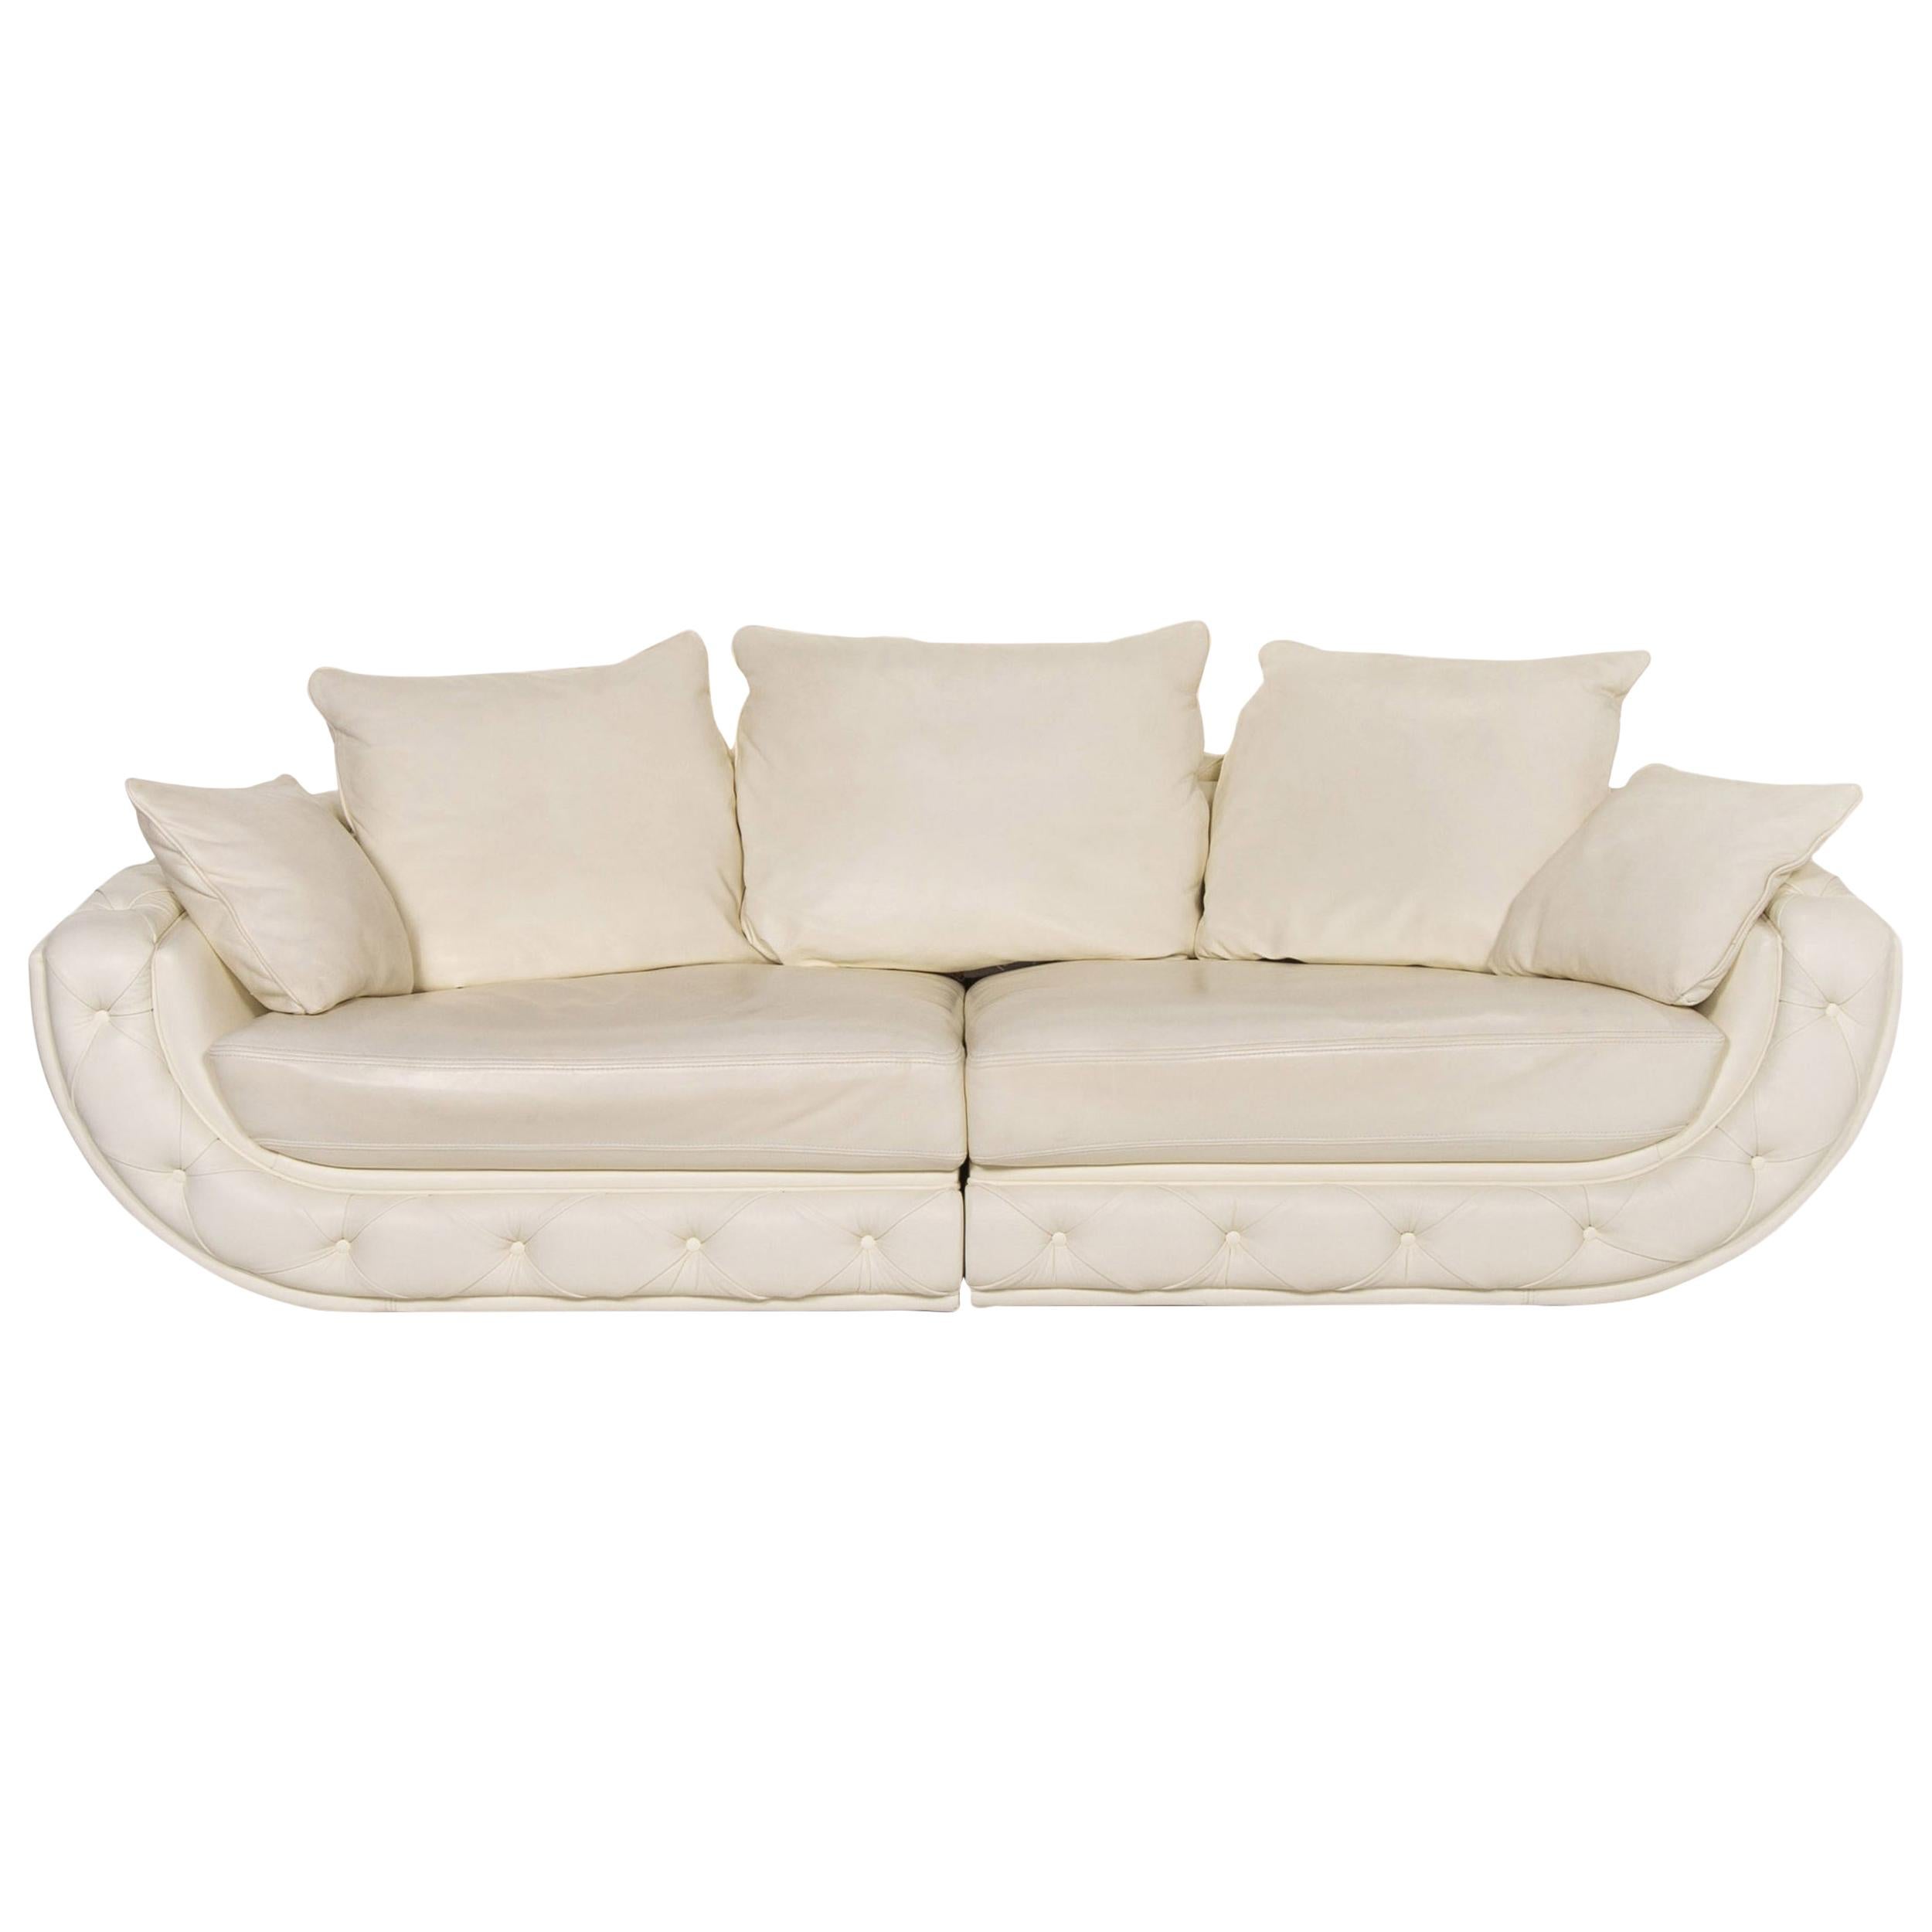 Nieri Leather Sofa Cream Four-Seat Couch For Sale